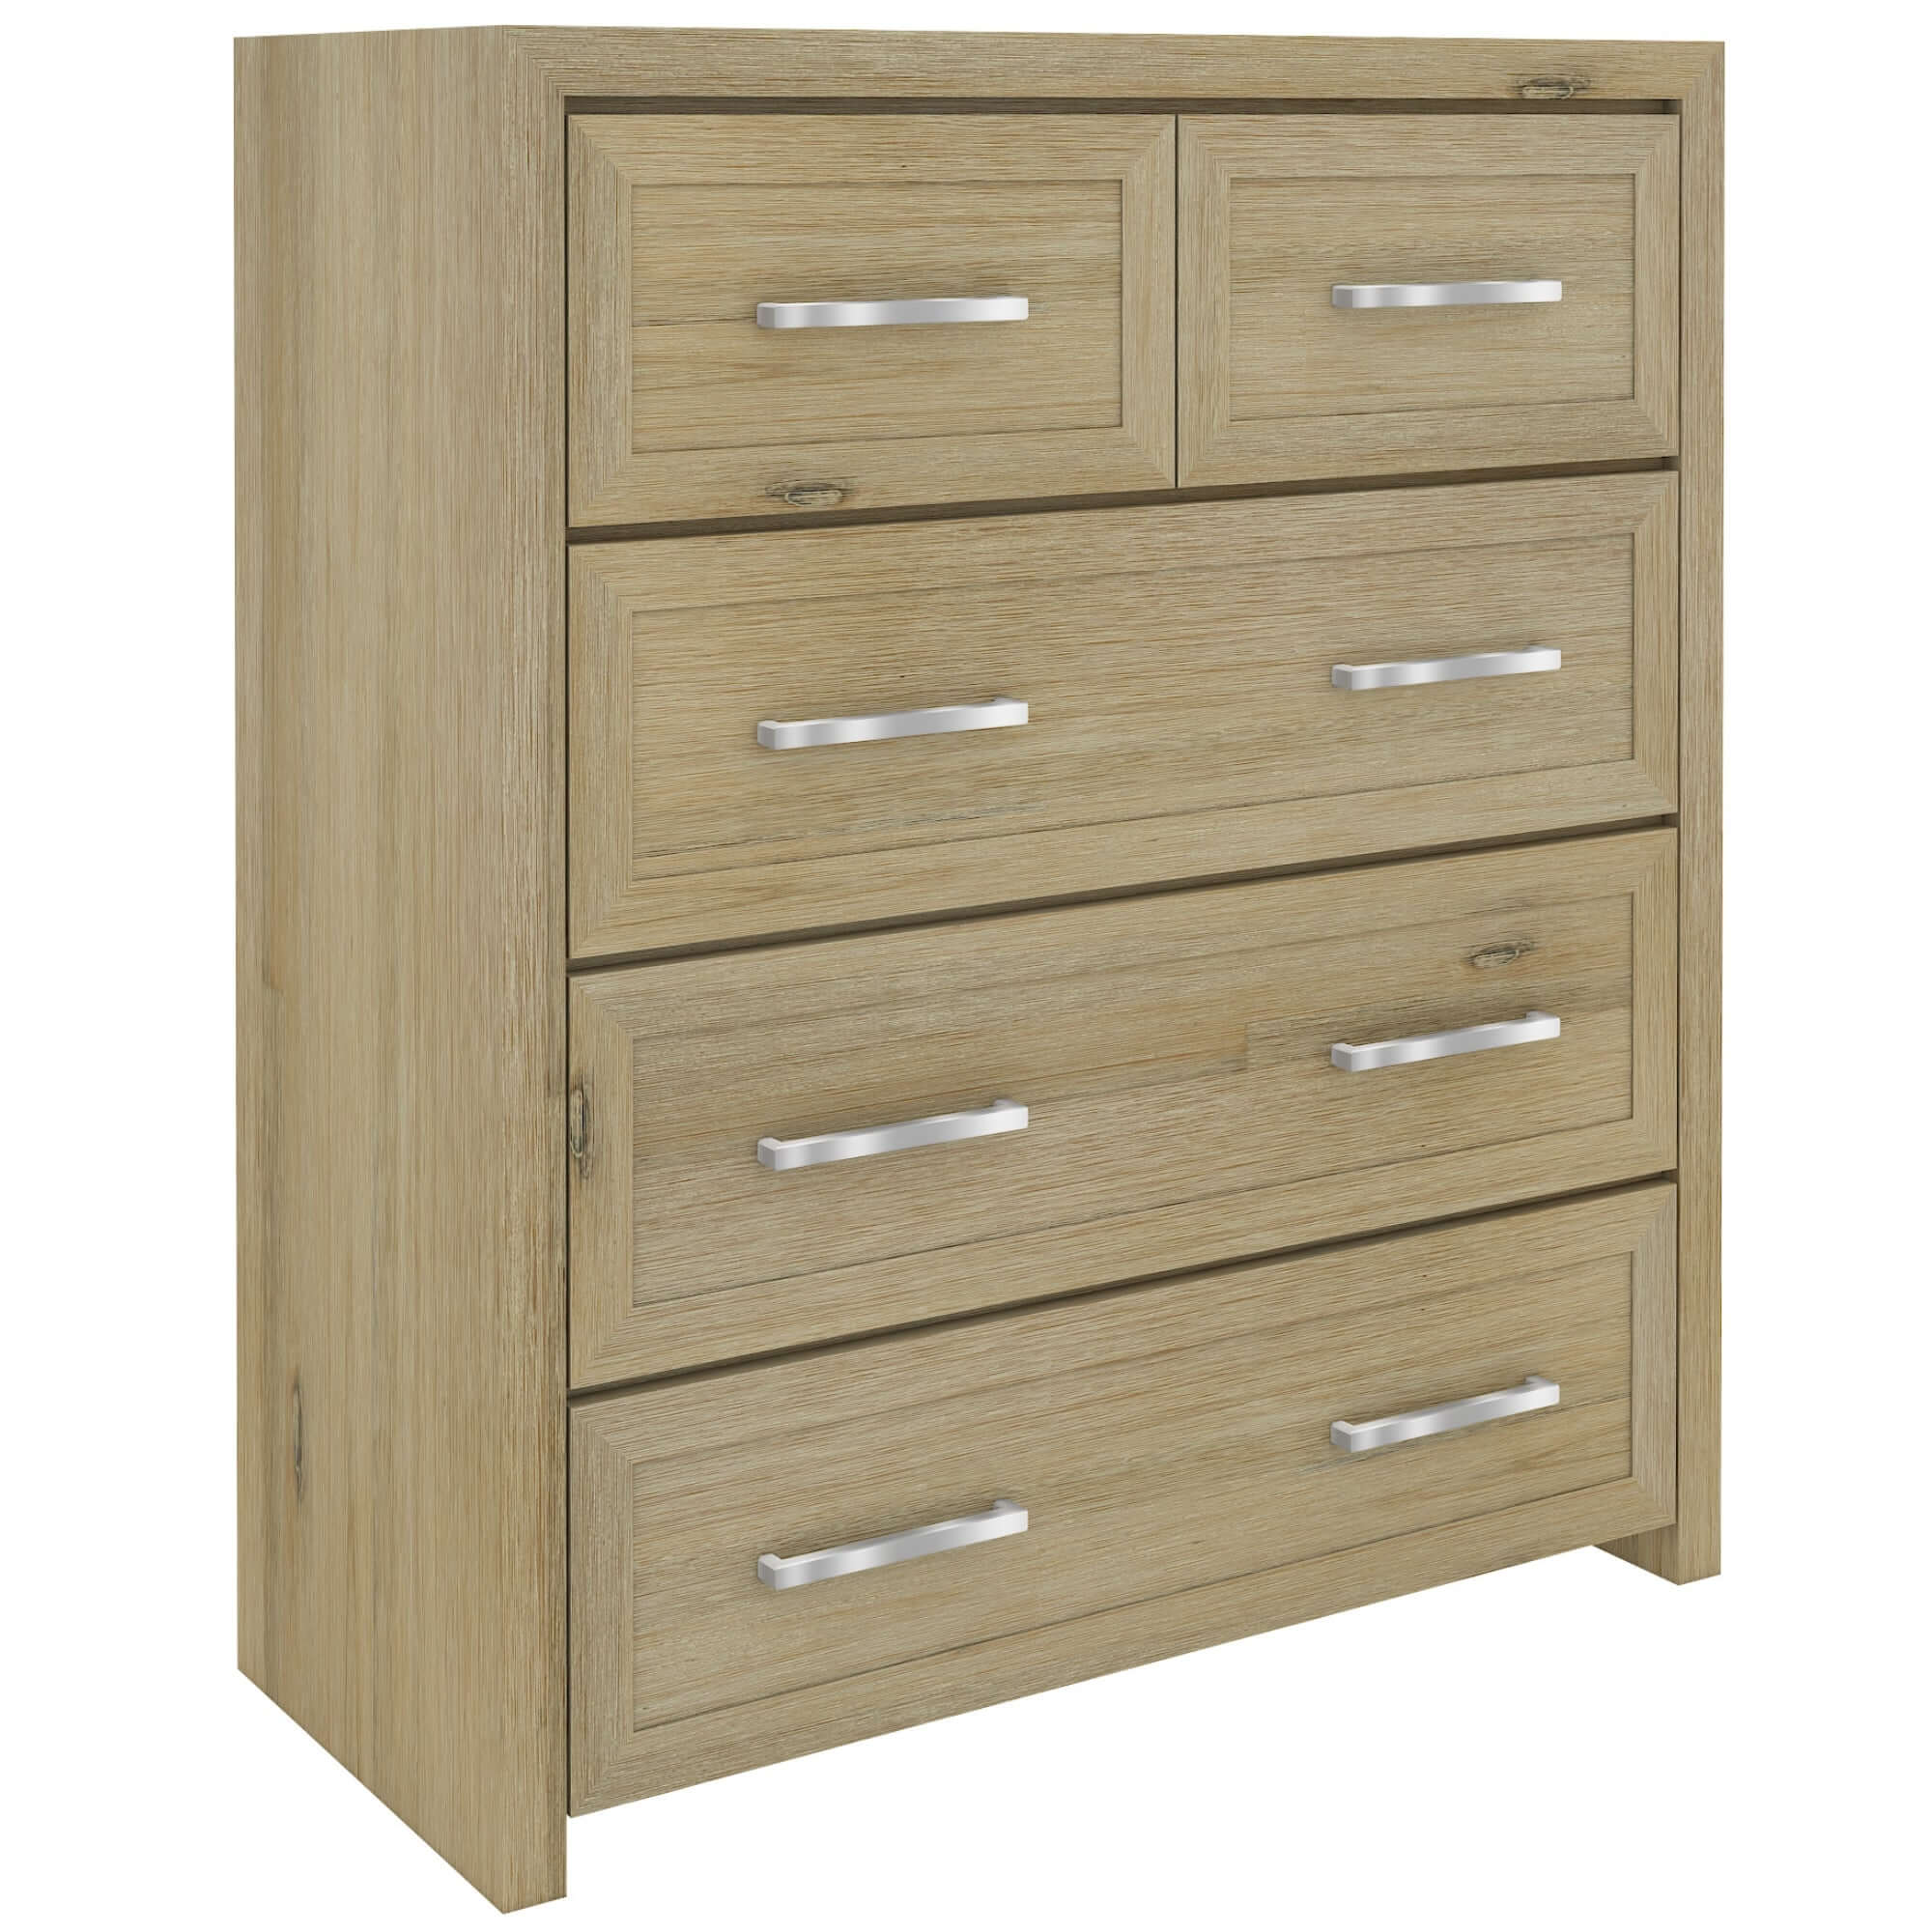 Gracelyn Tallboy 5 Chest of Drawers Solid Wood Bedroom Storage Cabinet - Smoke-Upinteriors